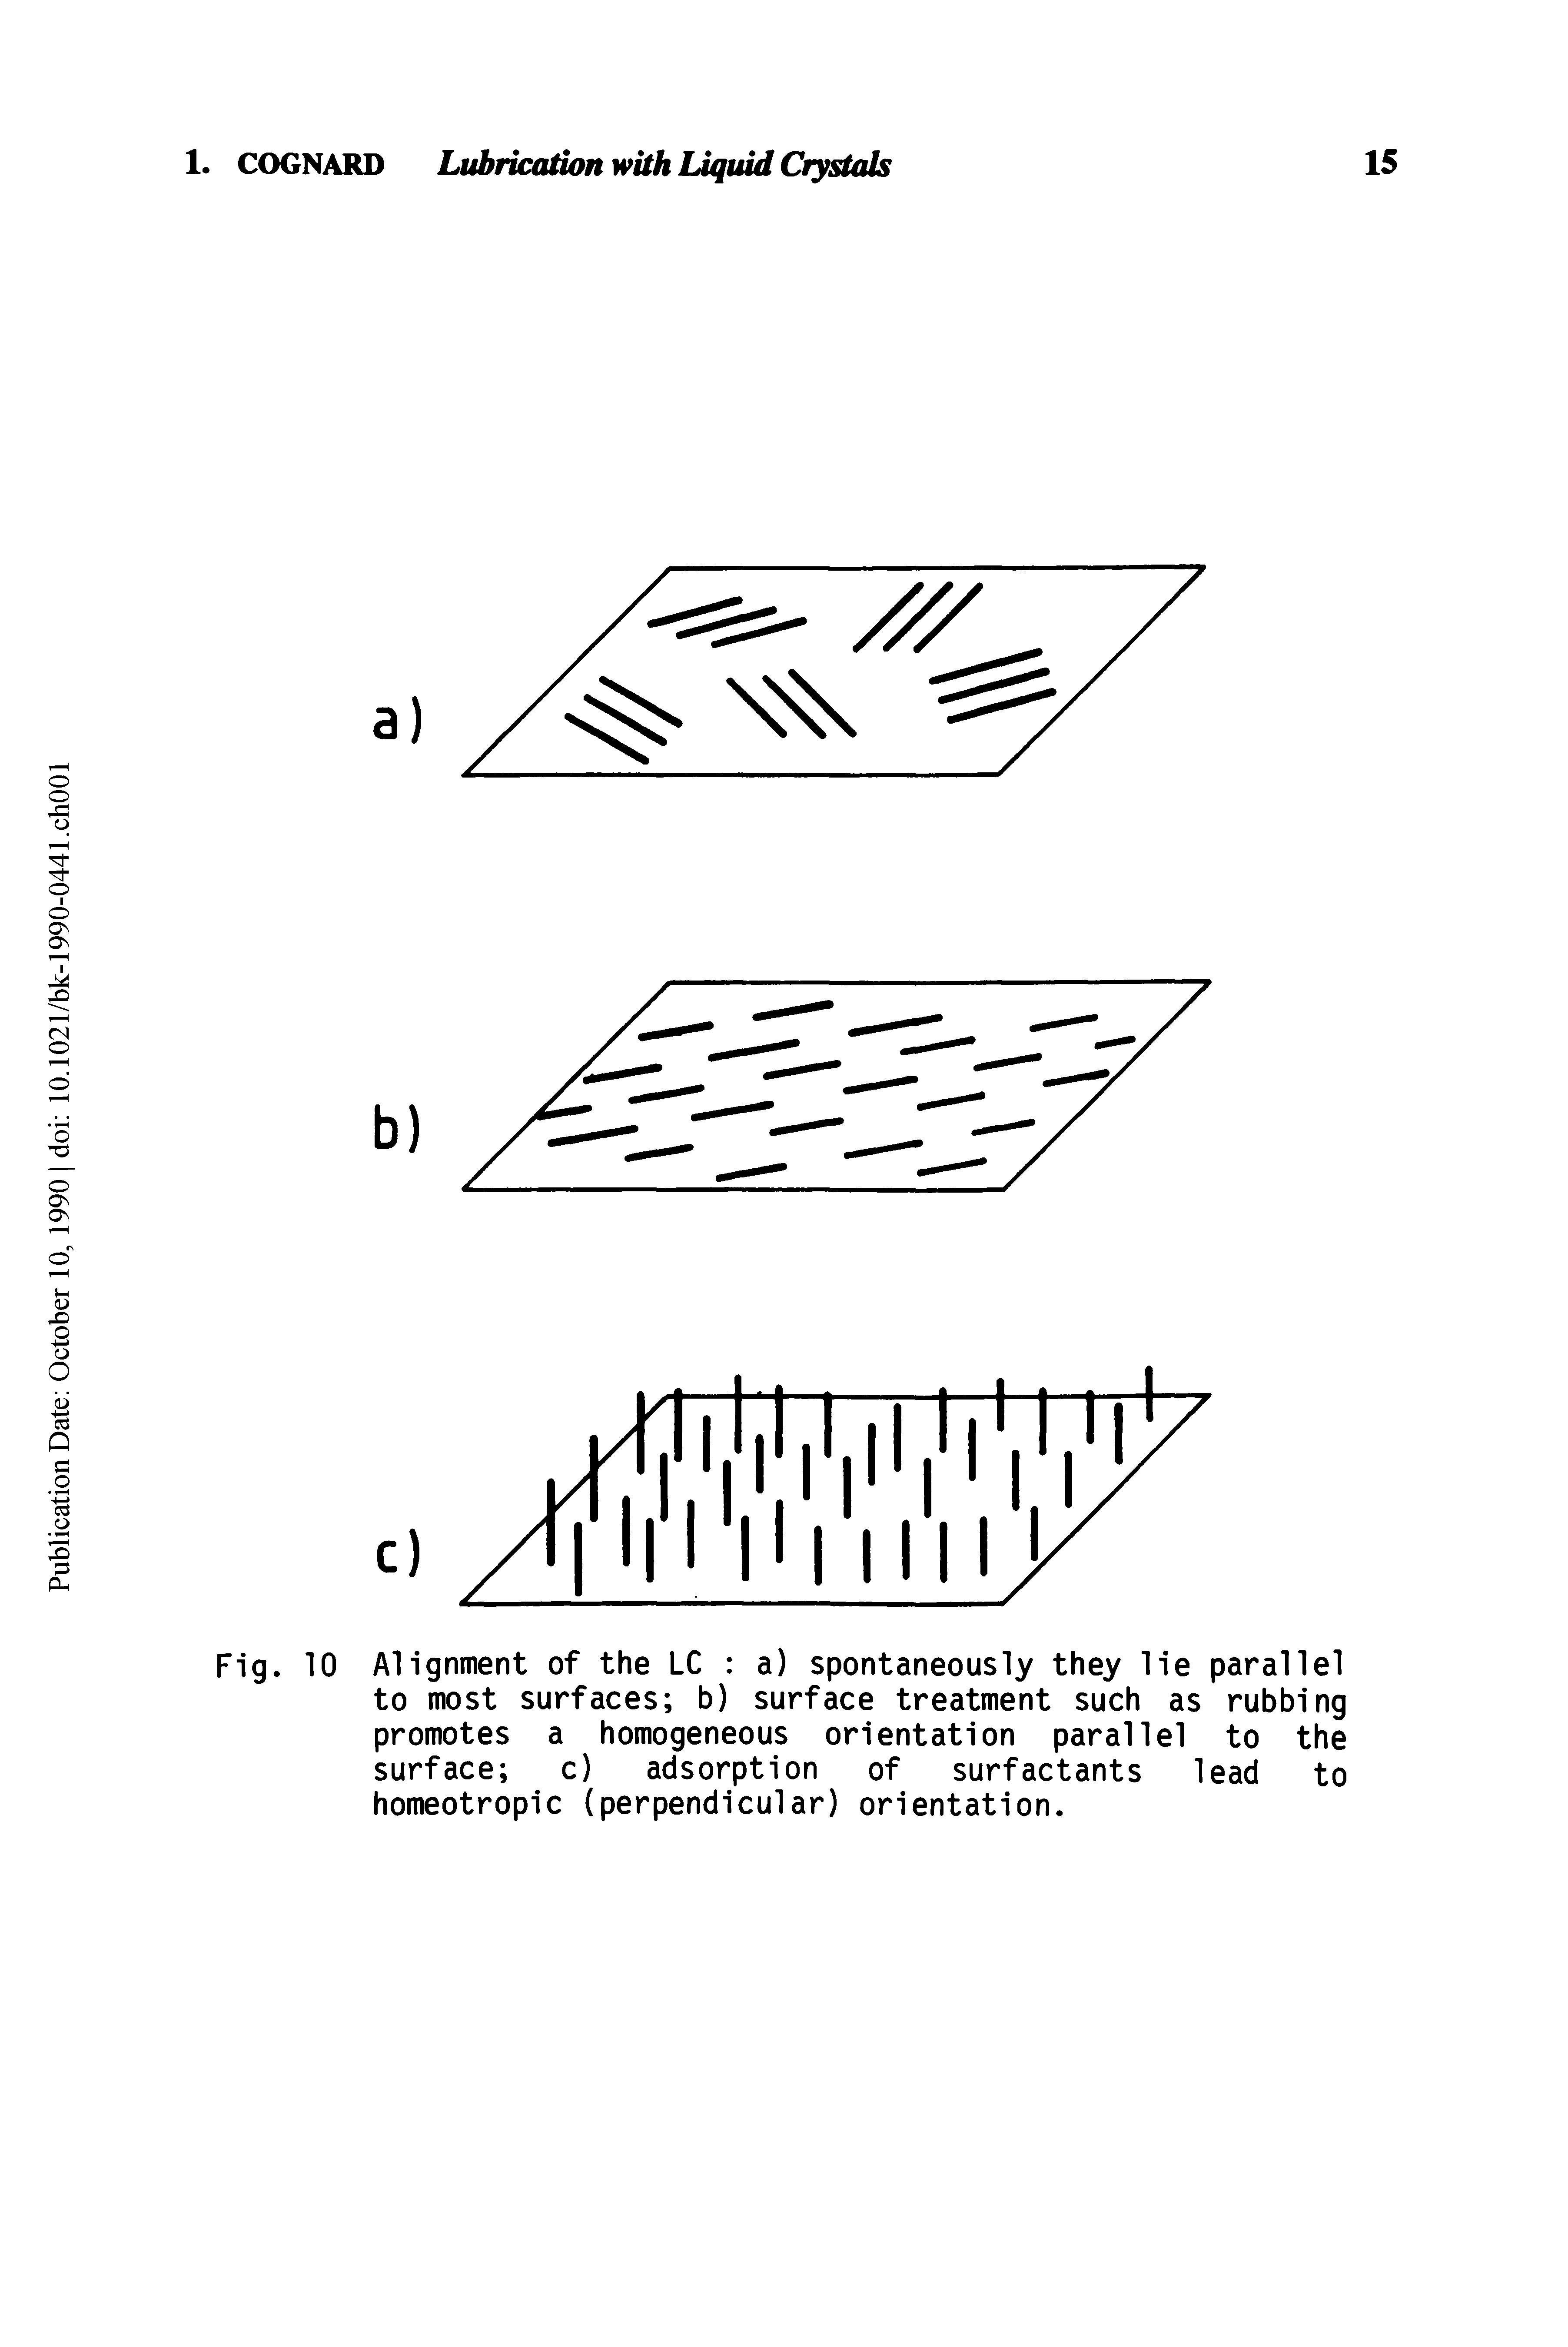 Fig. 10 Alignment of the LC a) spontaneously they lie parallel to most surfaces b) surface treatment such as rubbing promotes a homogeneous orientation parallel to the surface c) adsorption of surfactants lead to homeotropic (perpendicular) orientation.